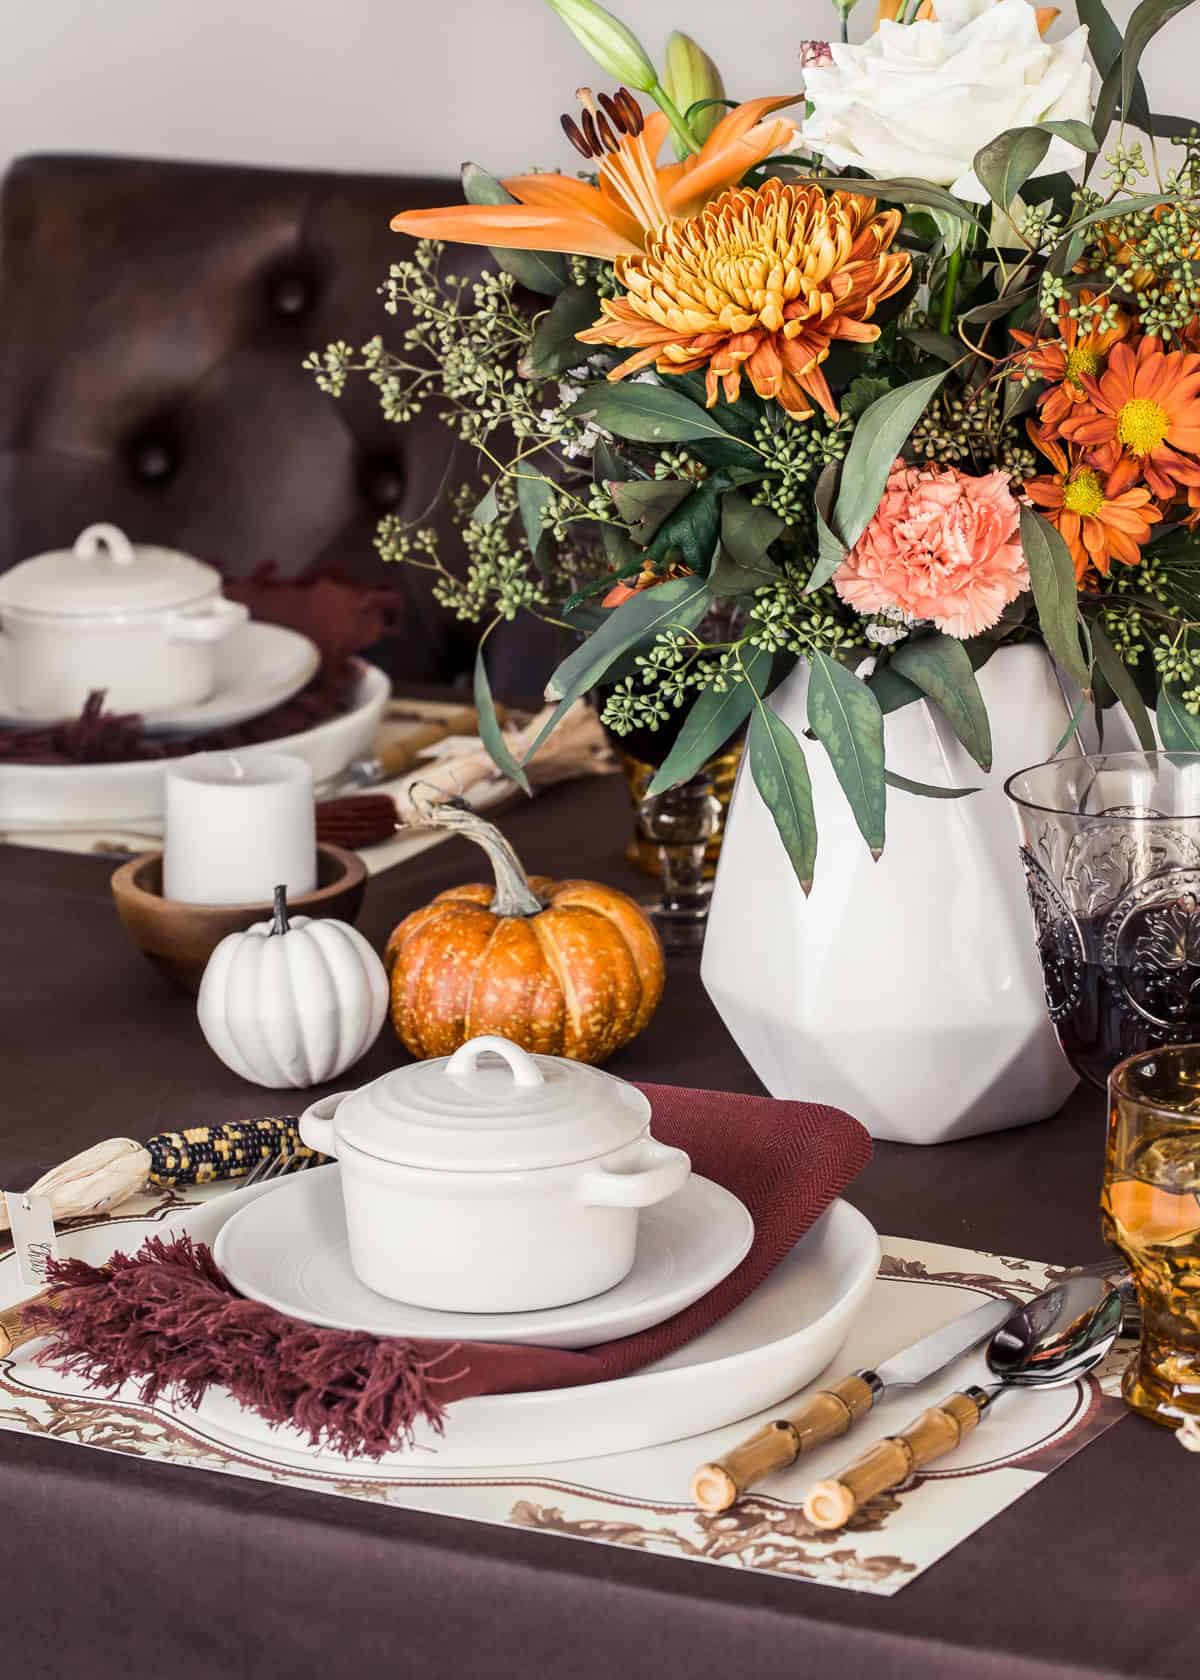 Thanksgiving table setting with brown tablecloth and white dishes, fall flower centerpiece.